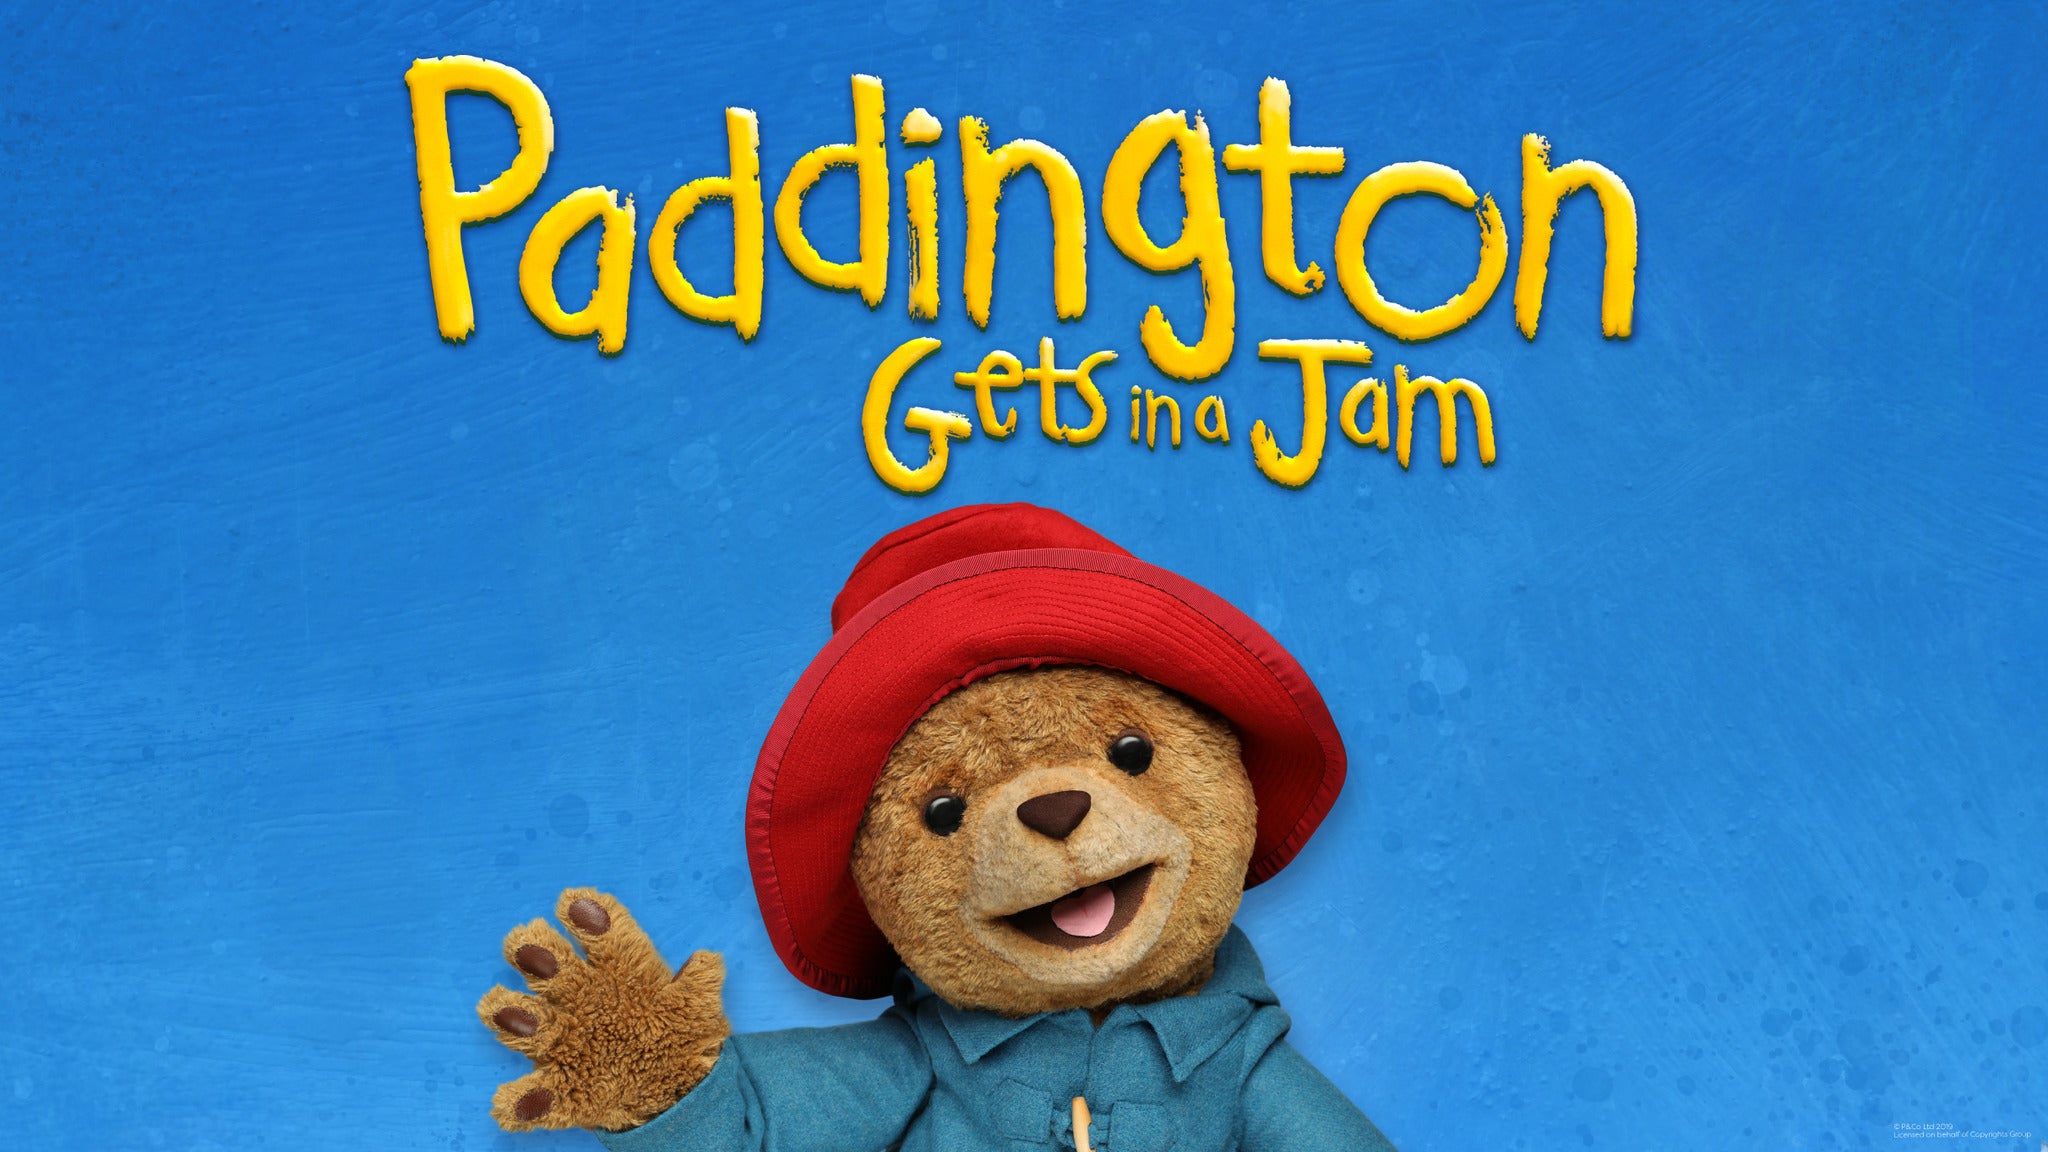 Paddington Gets in a Jam pre-sale passcode for show tickets in St. Louis, MO (Stifel Theatre)